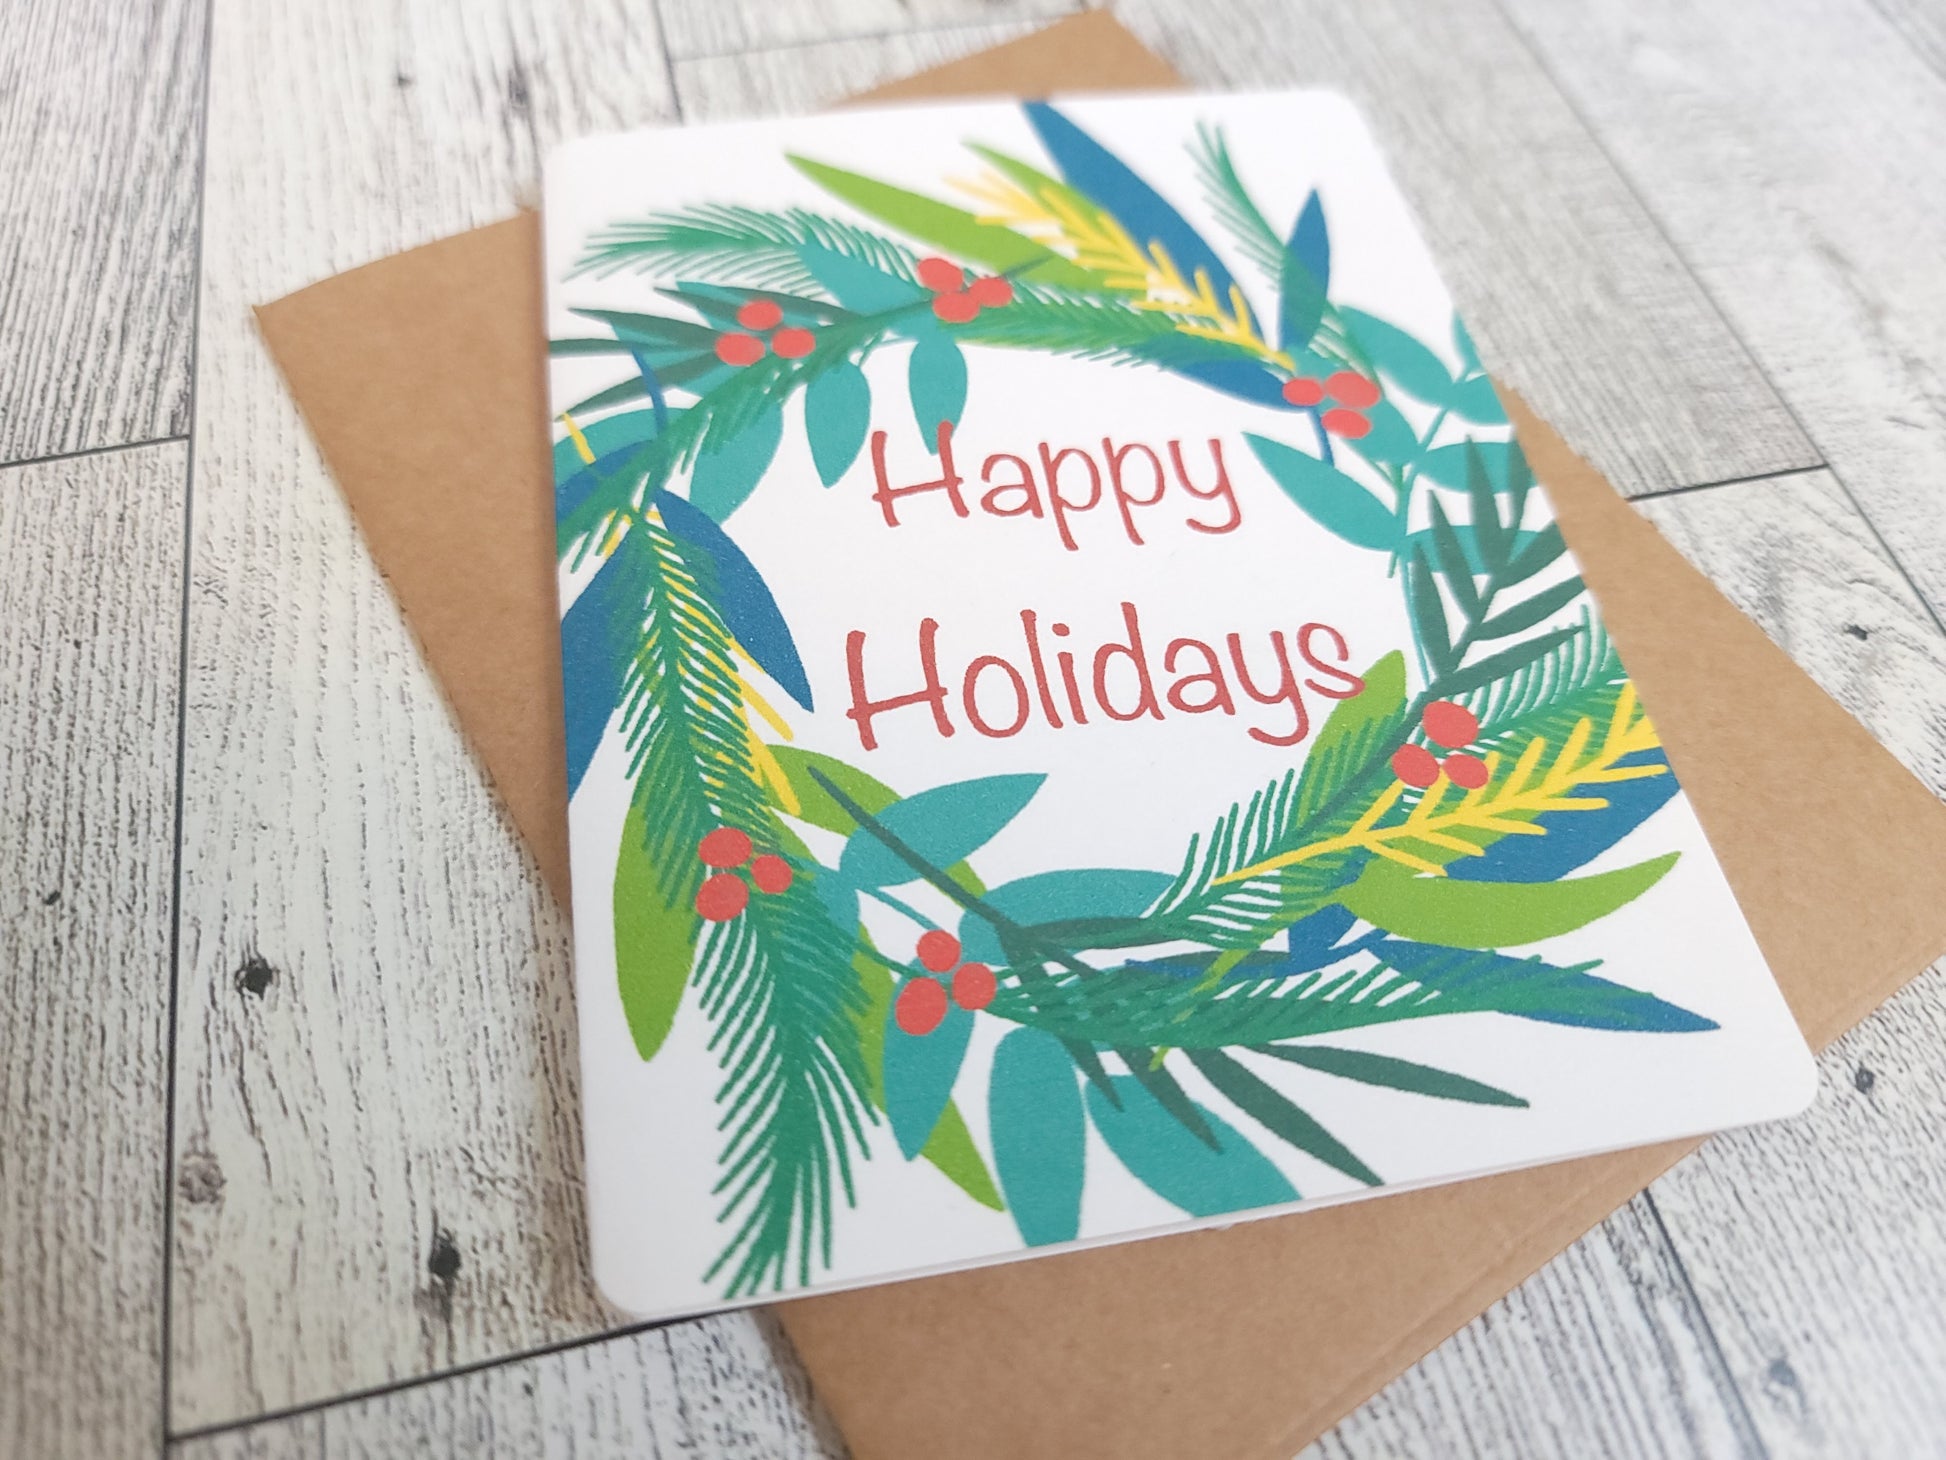 Happy Holidays Wreath Handmade Greeting Card - Recycled Paper and Kraft Envelop - Angled Overhead Shot